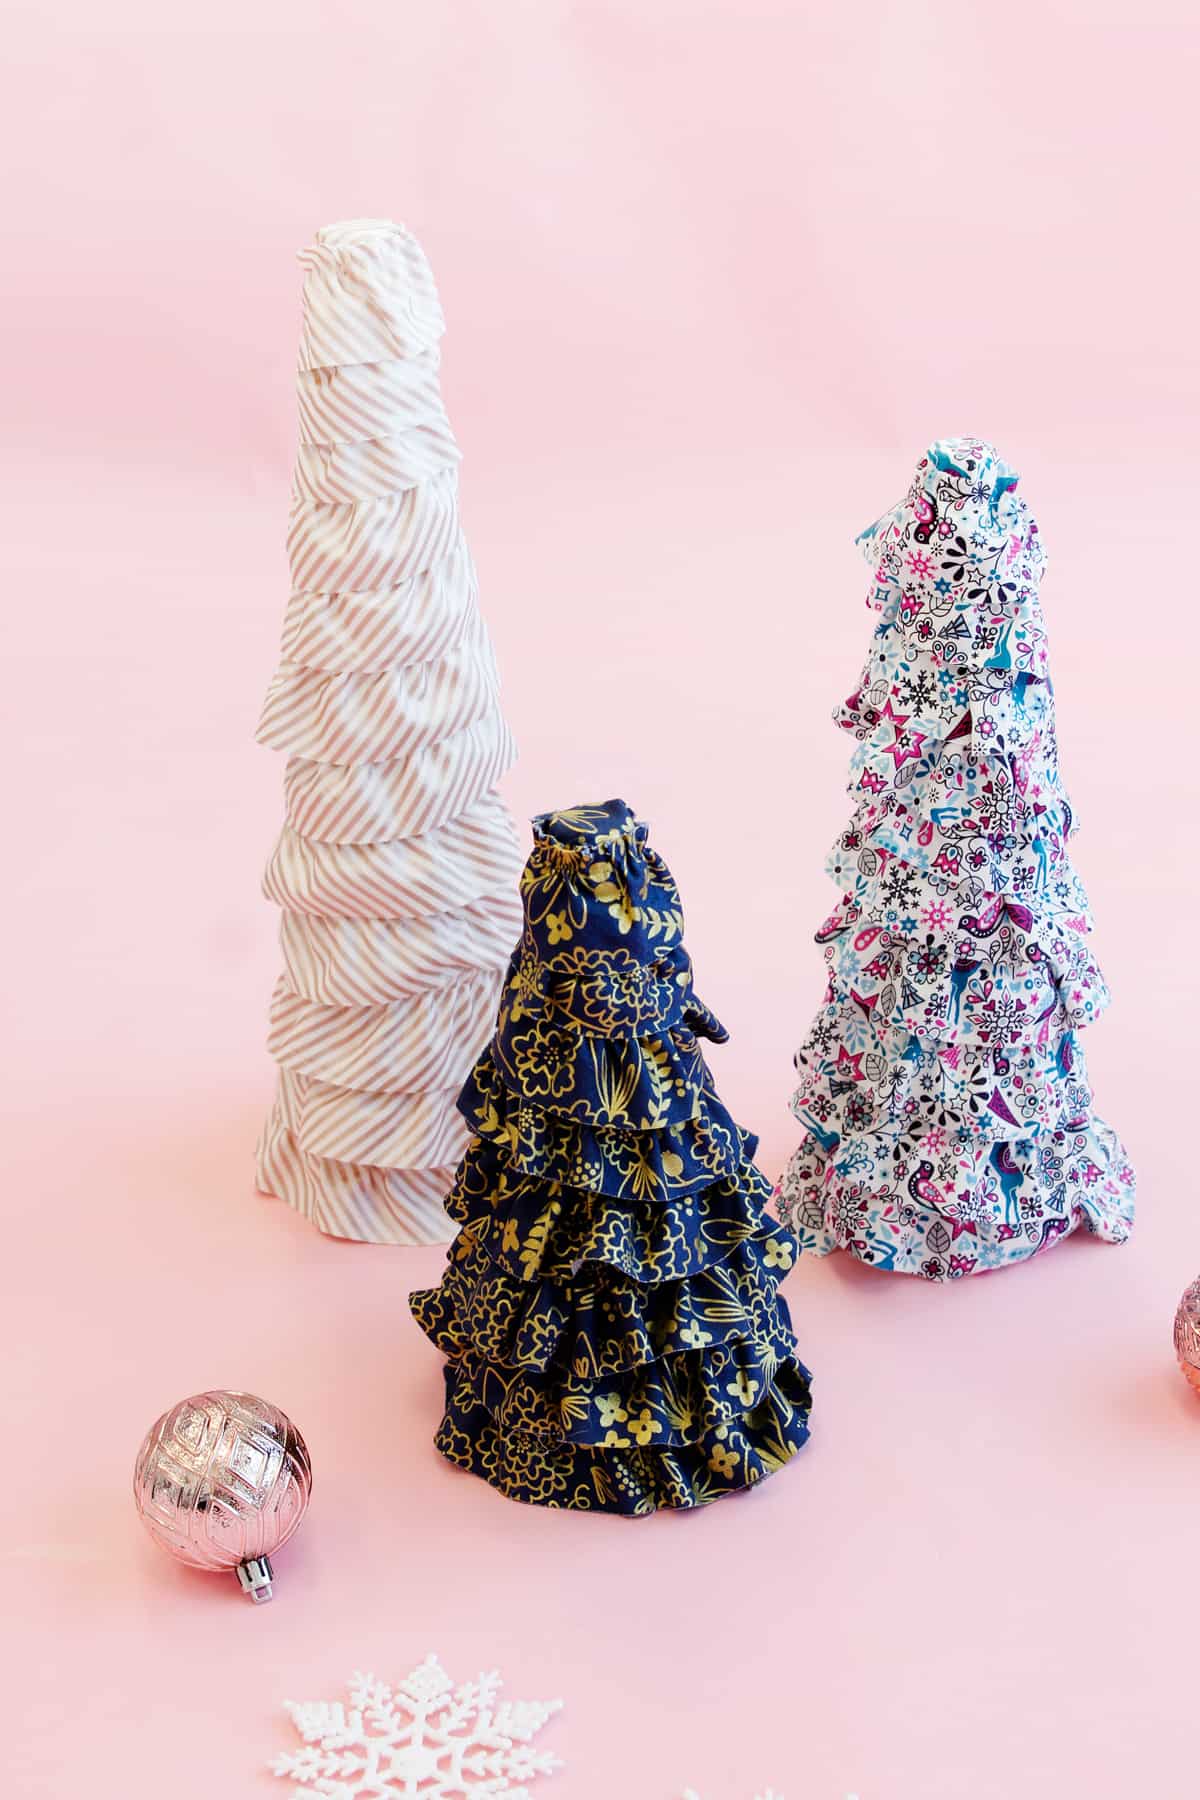 Foam Decorated Christmas Trees, Projects